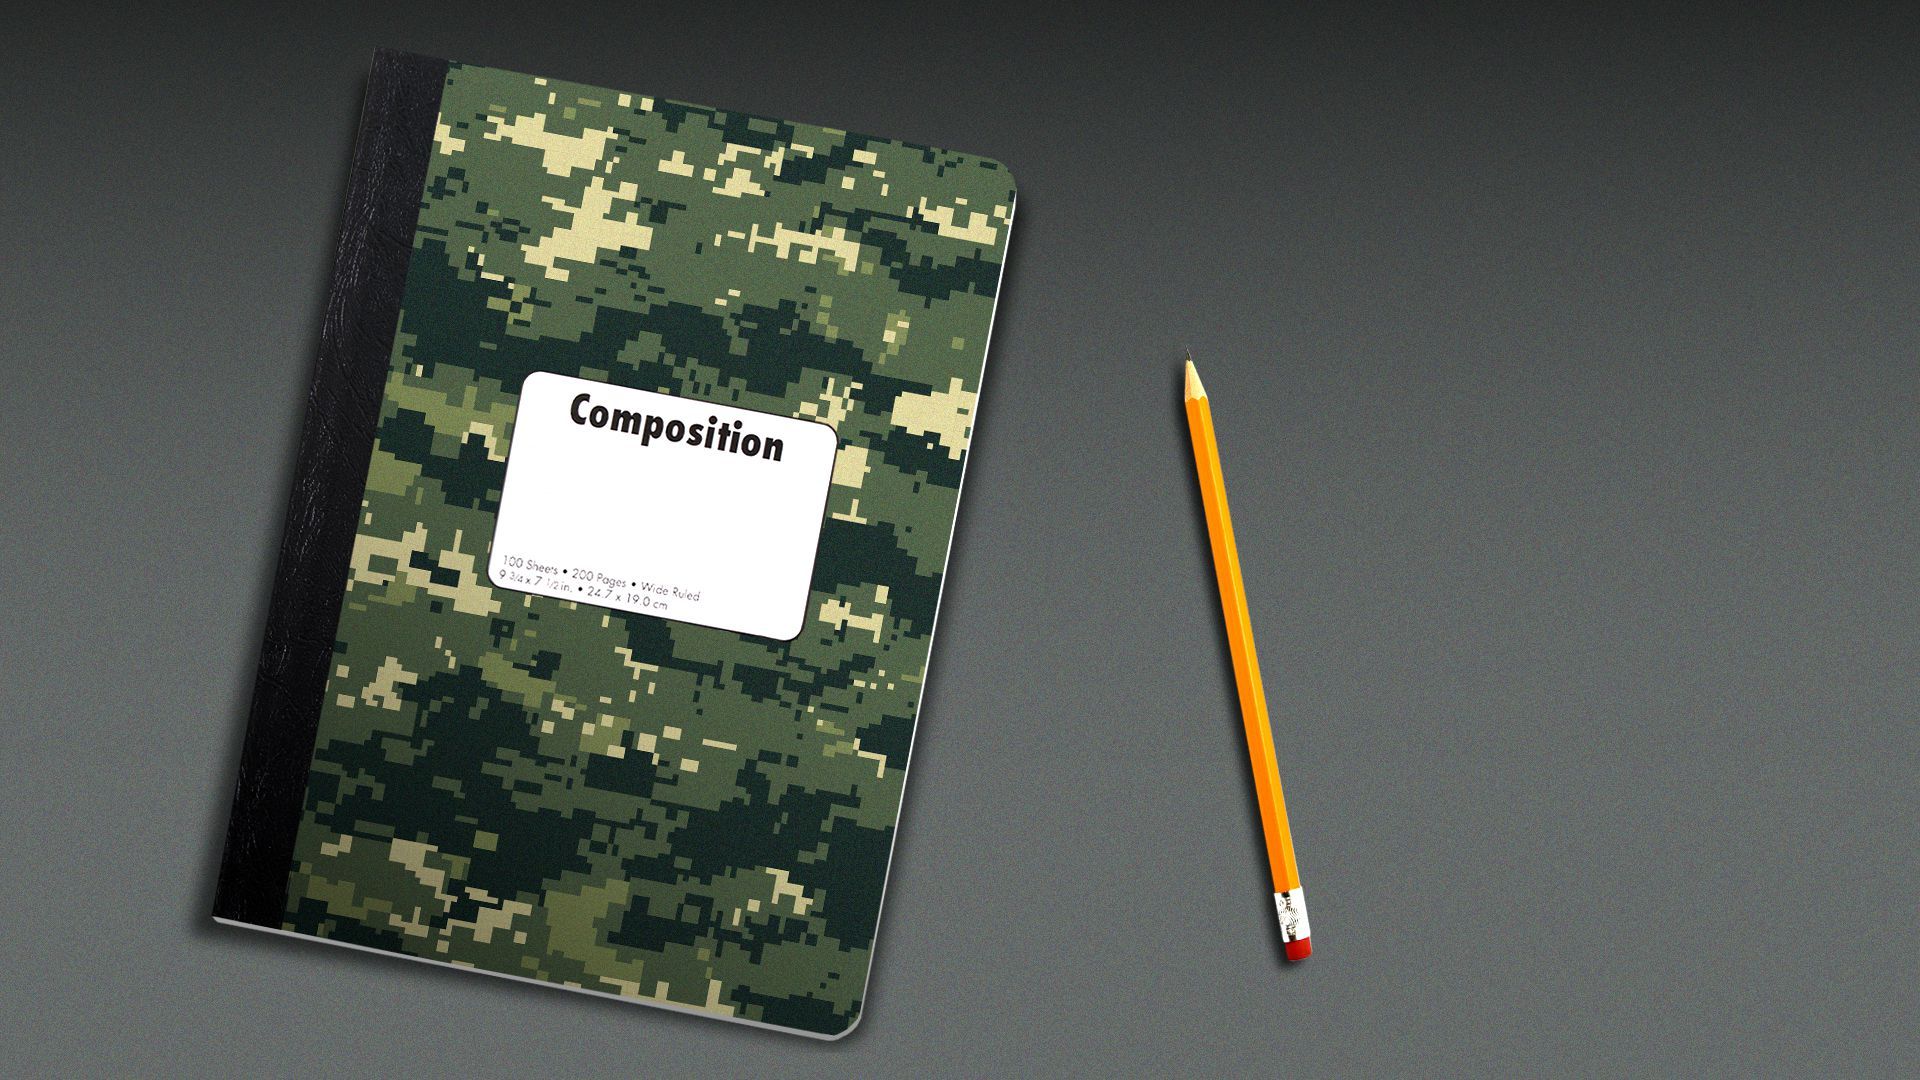 Illustration of a composition school notebook with a camouflage pattern